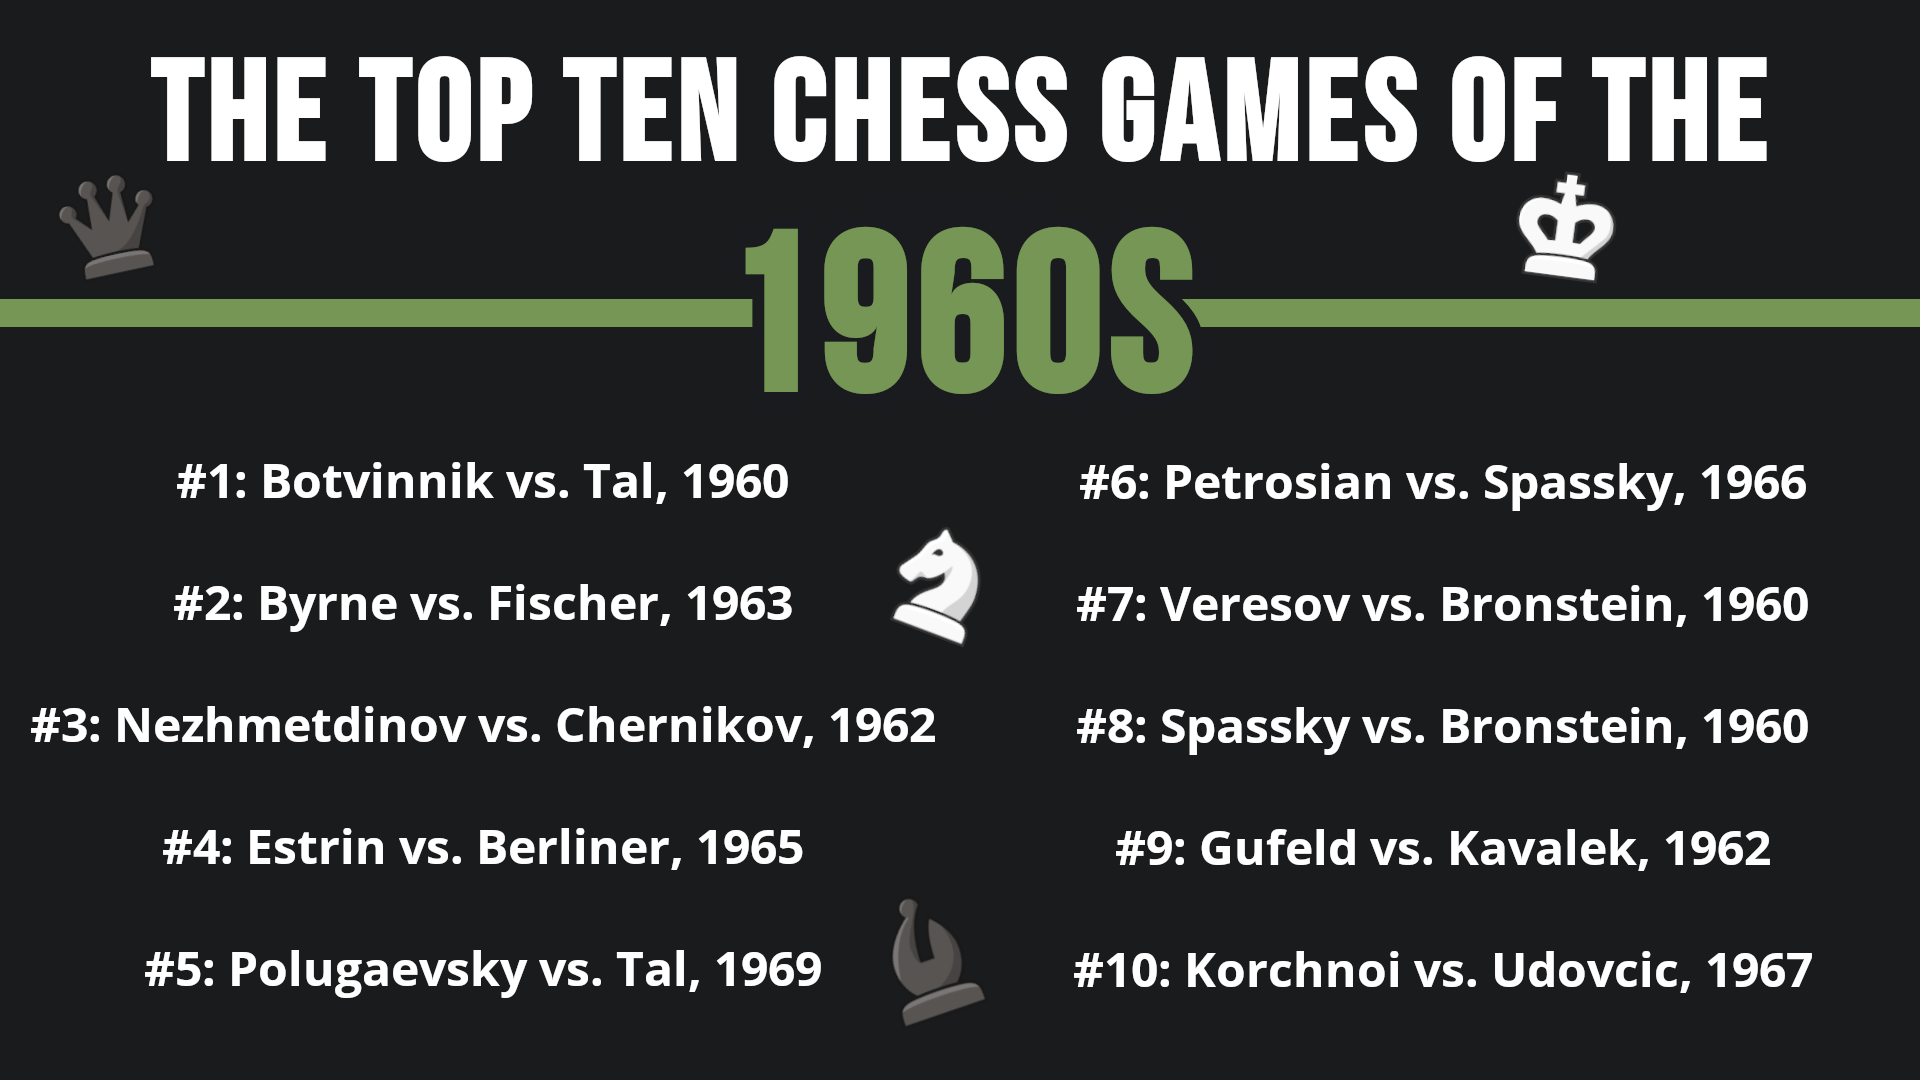 The Top 10 Games Of The 1960s - Chess Lessons 